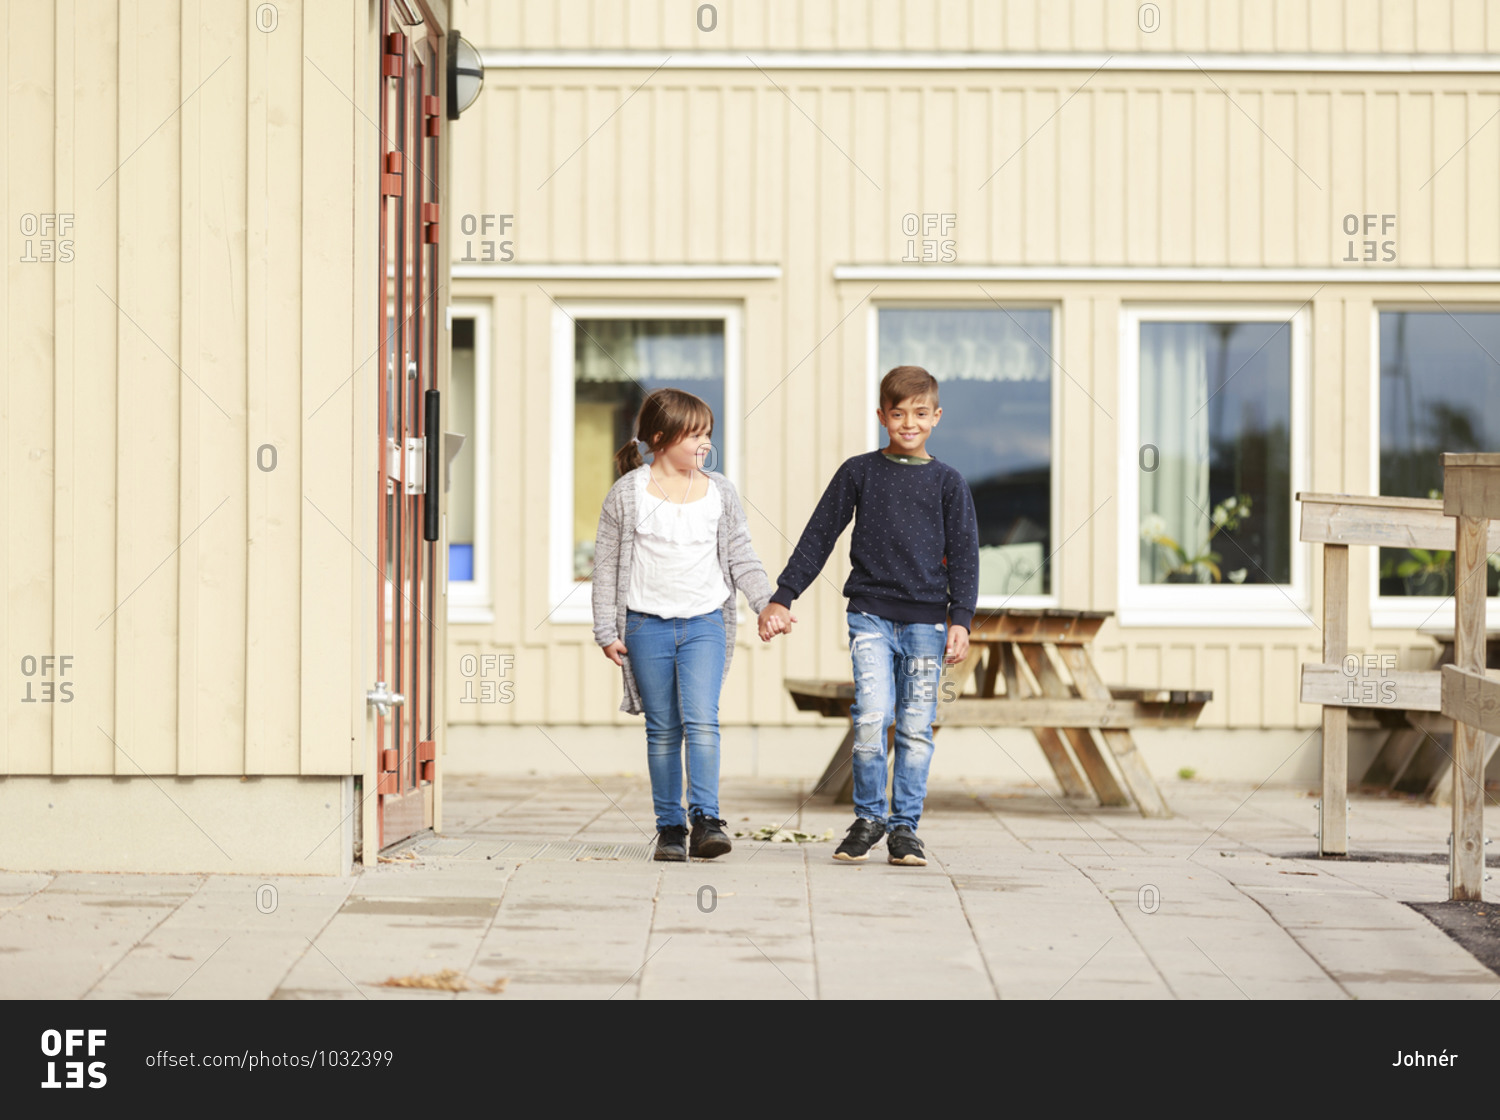 Boy and girl in front of school building